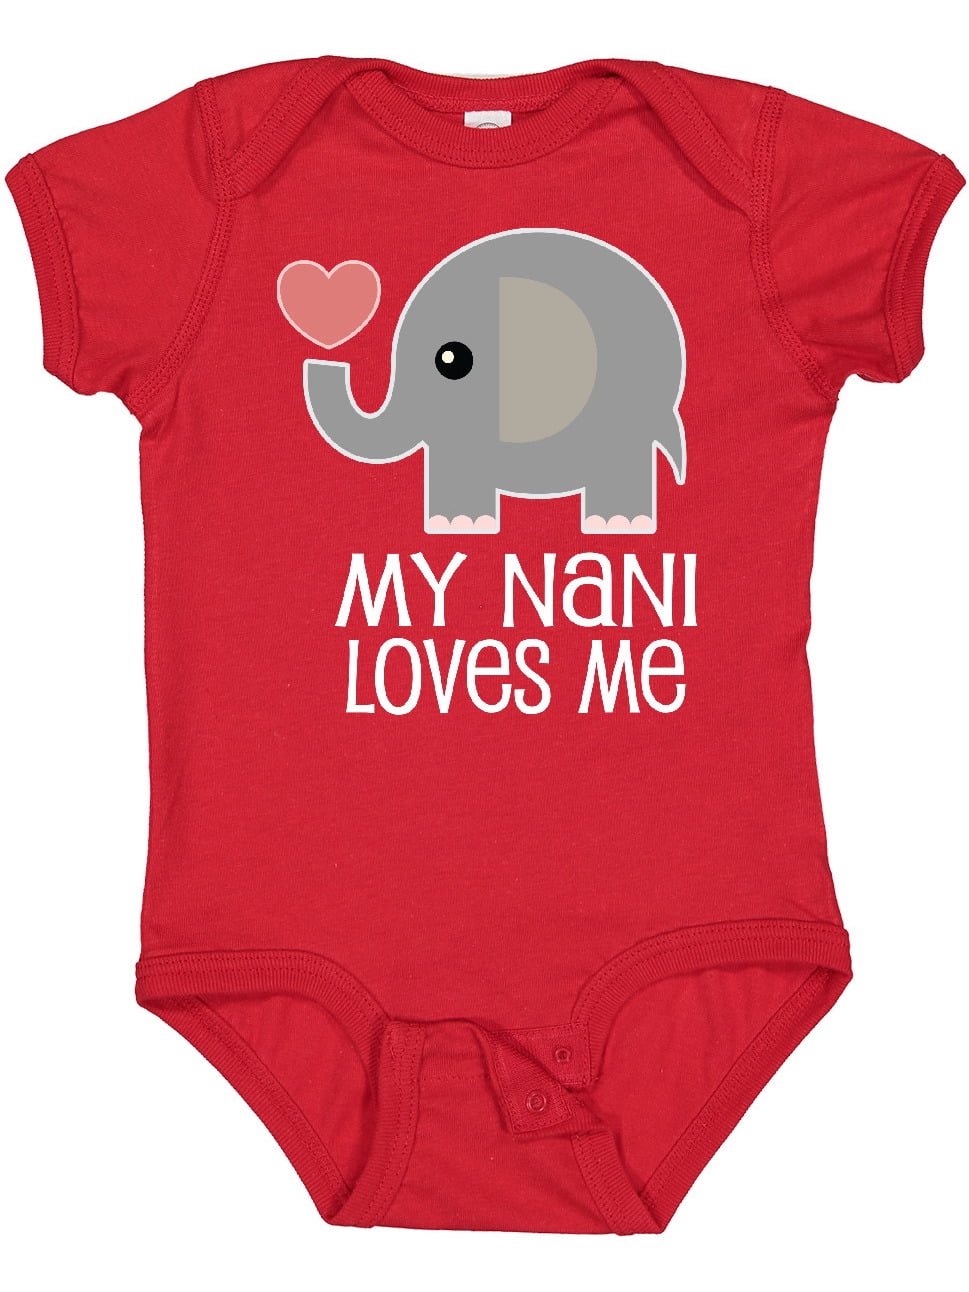 Baby Romper Im Going to Love Elephants When I Grow Up Just Like My Memaw 